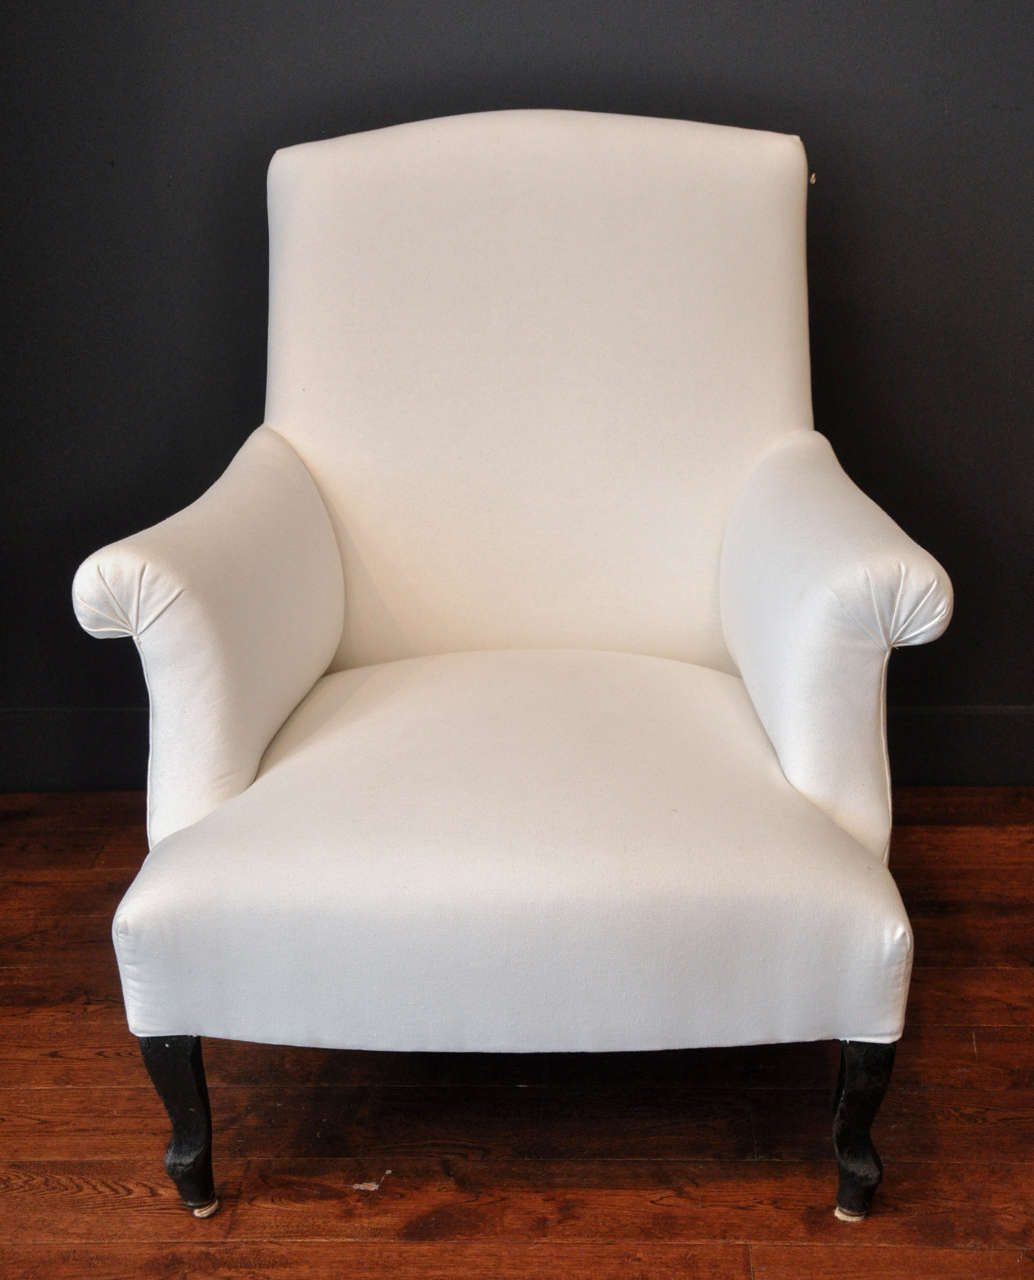 Restored, restuffed and upholstered in heavy white cotton. Can be recovered with customers own fabric or used with existing white cotton fabric.